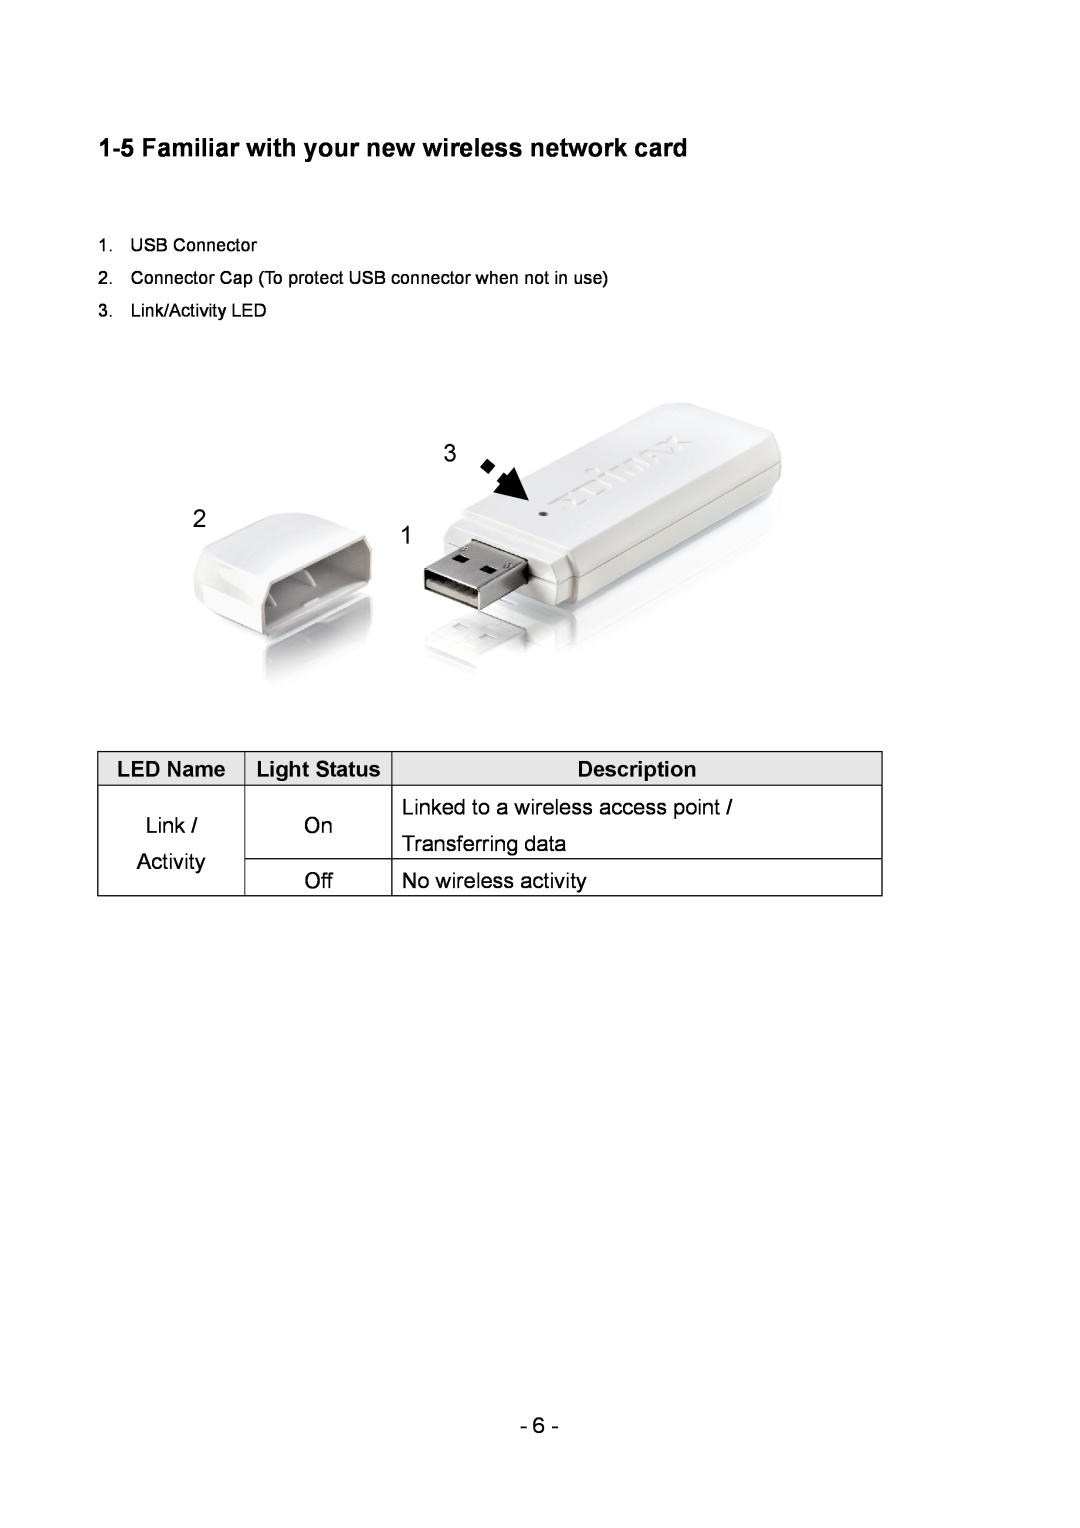 Edimax Technology LAN USB Adapter Familiar with your new wireless network card, LED Name, Light Status, Description 